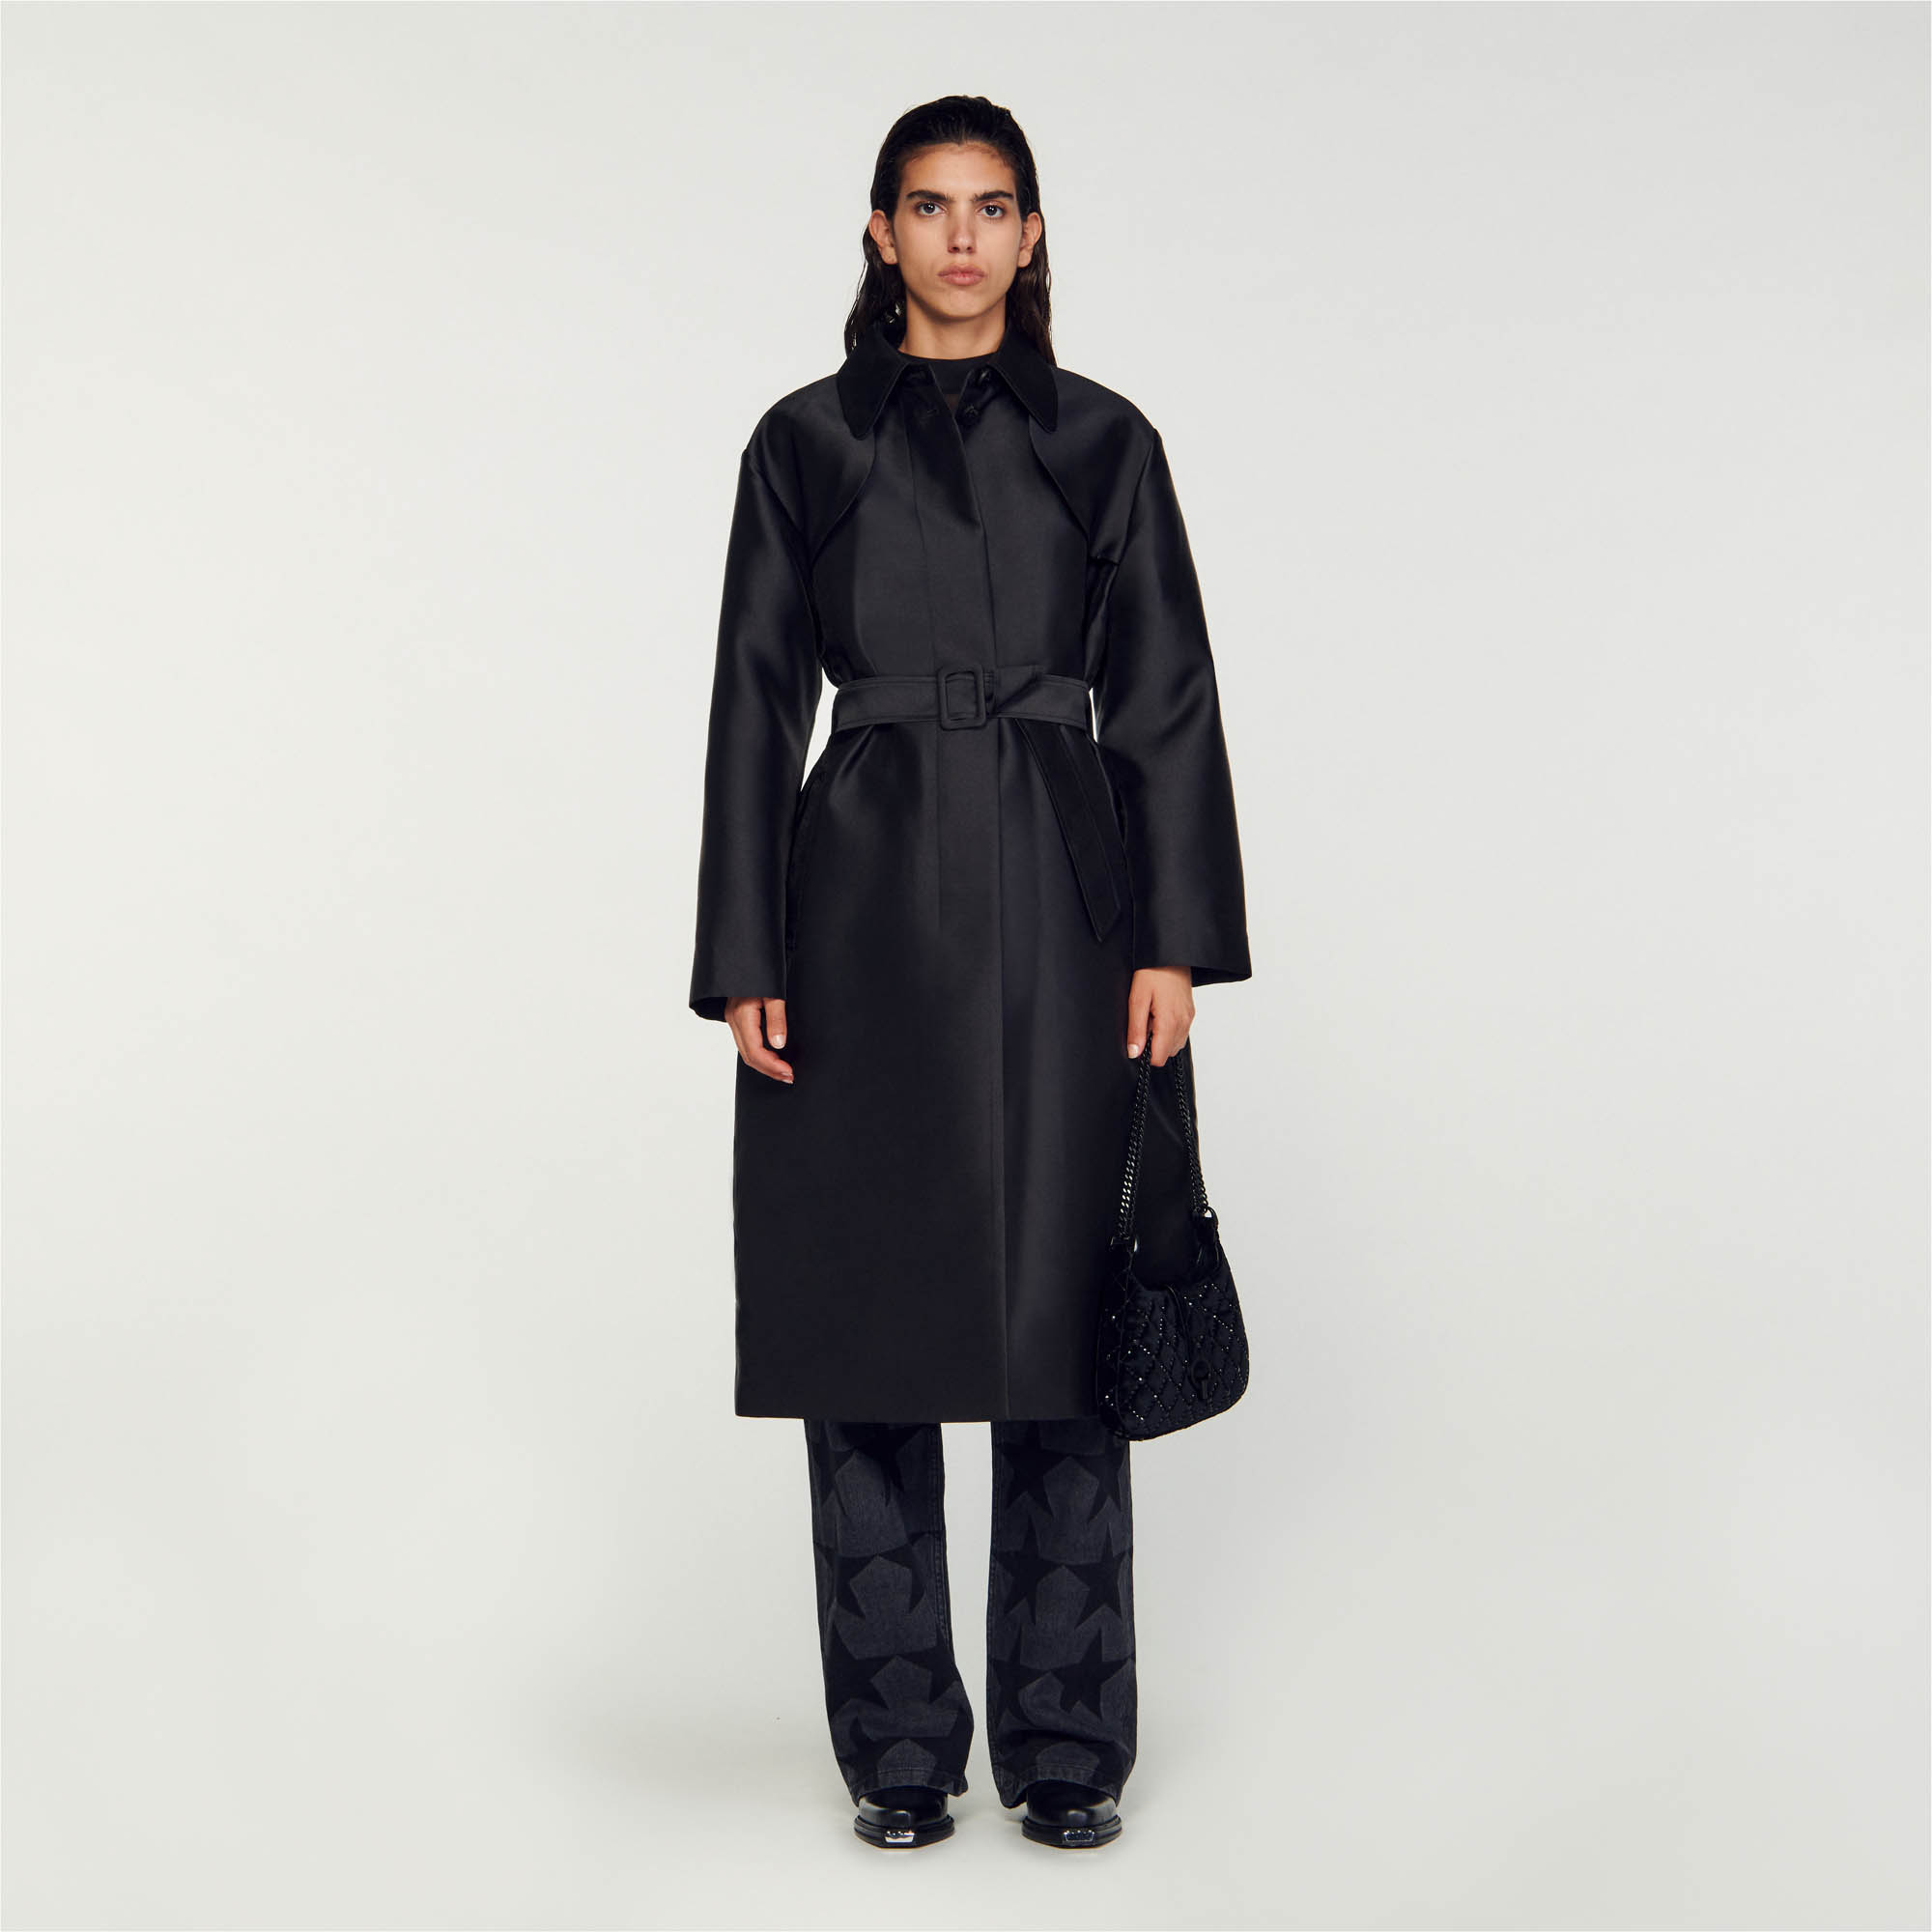 Sandro polyester Lining: Shiny fabric trench coat with shirt collar, long sleeves, flap along bottom, button fastening, pockets and removable tone-on-tone belt that ties at the waist